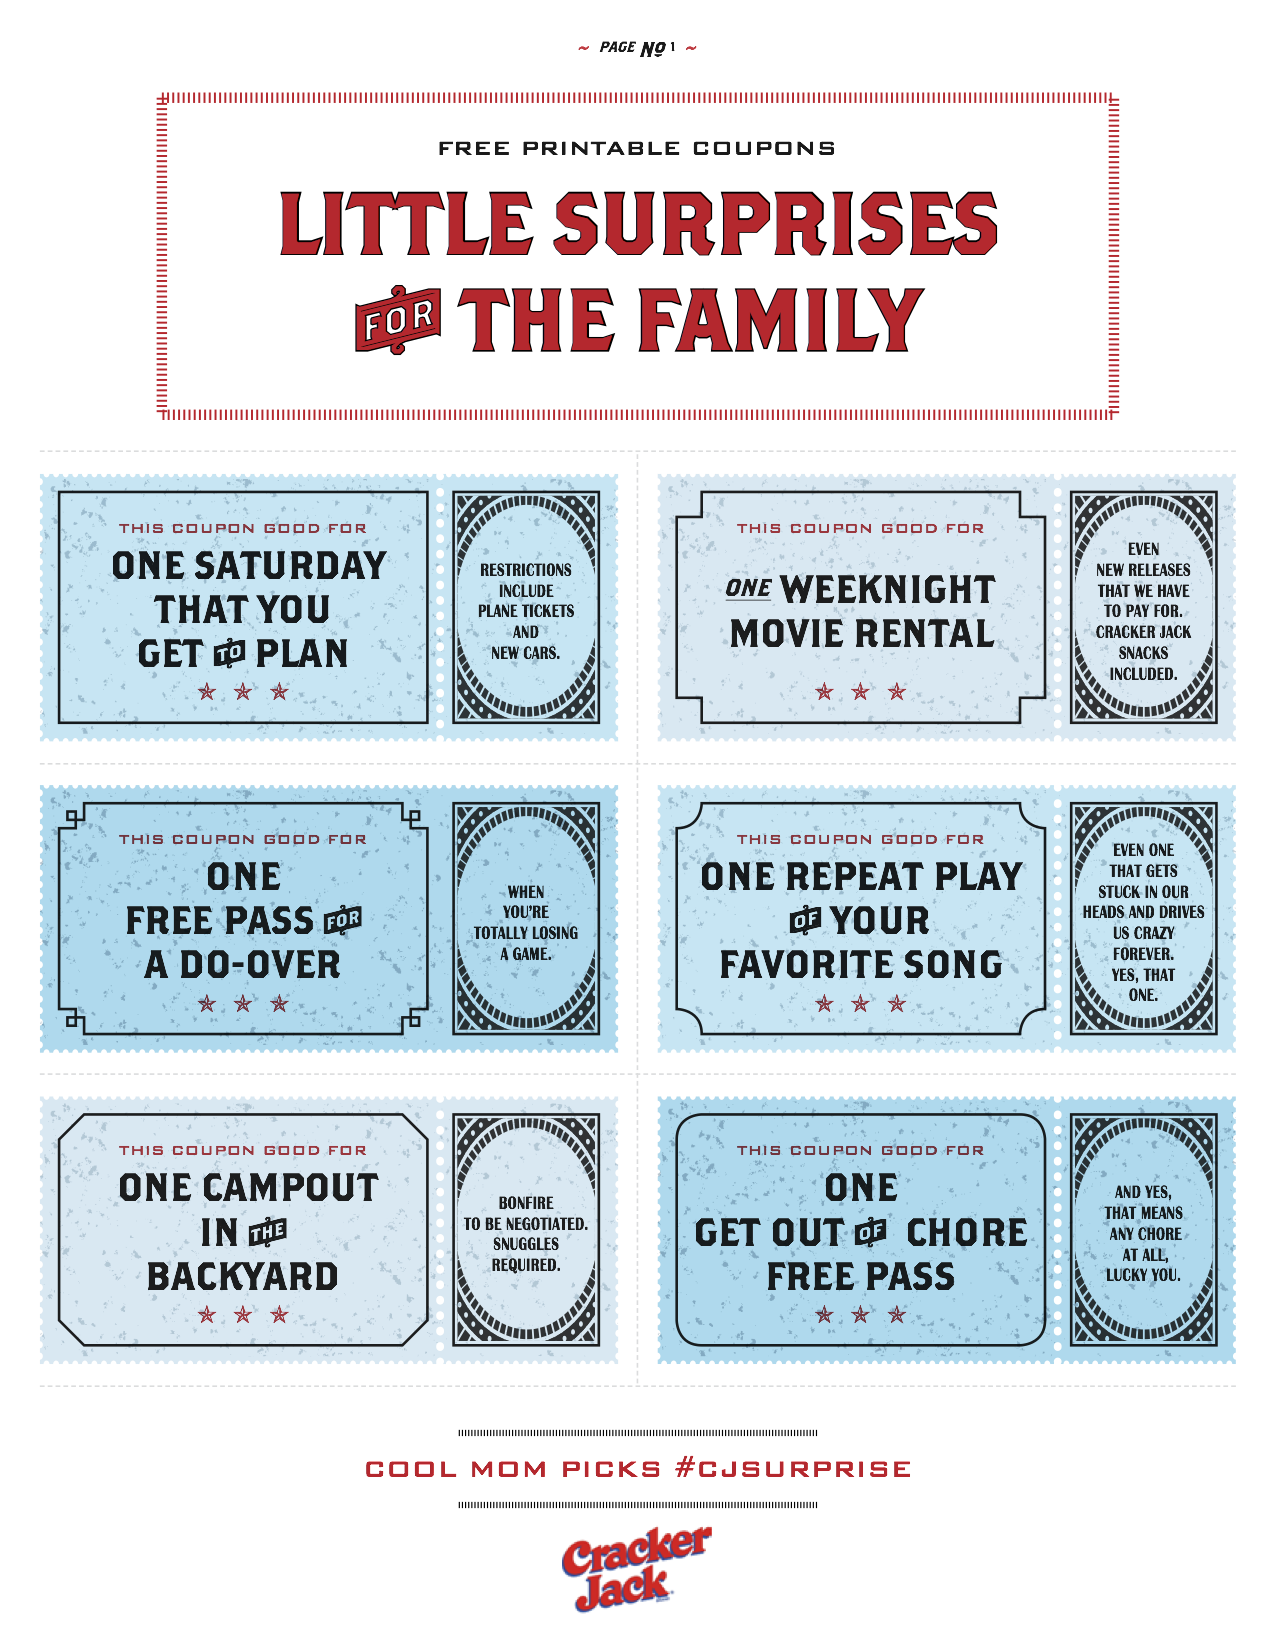 Free Printable Coupons That Make Awesome Family Gifts